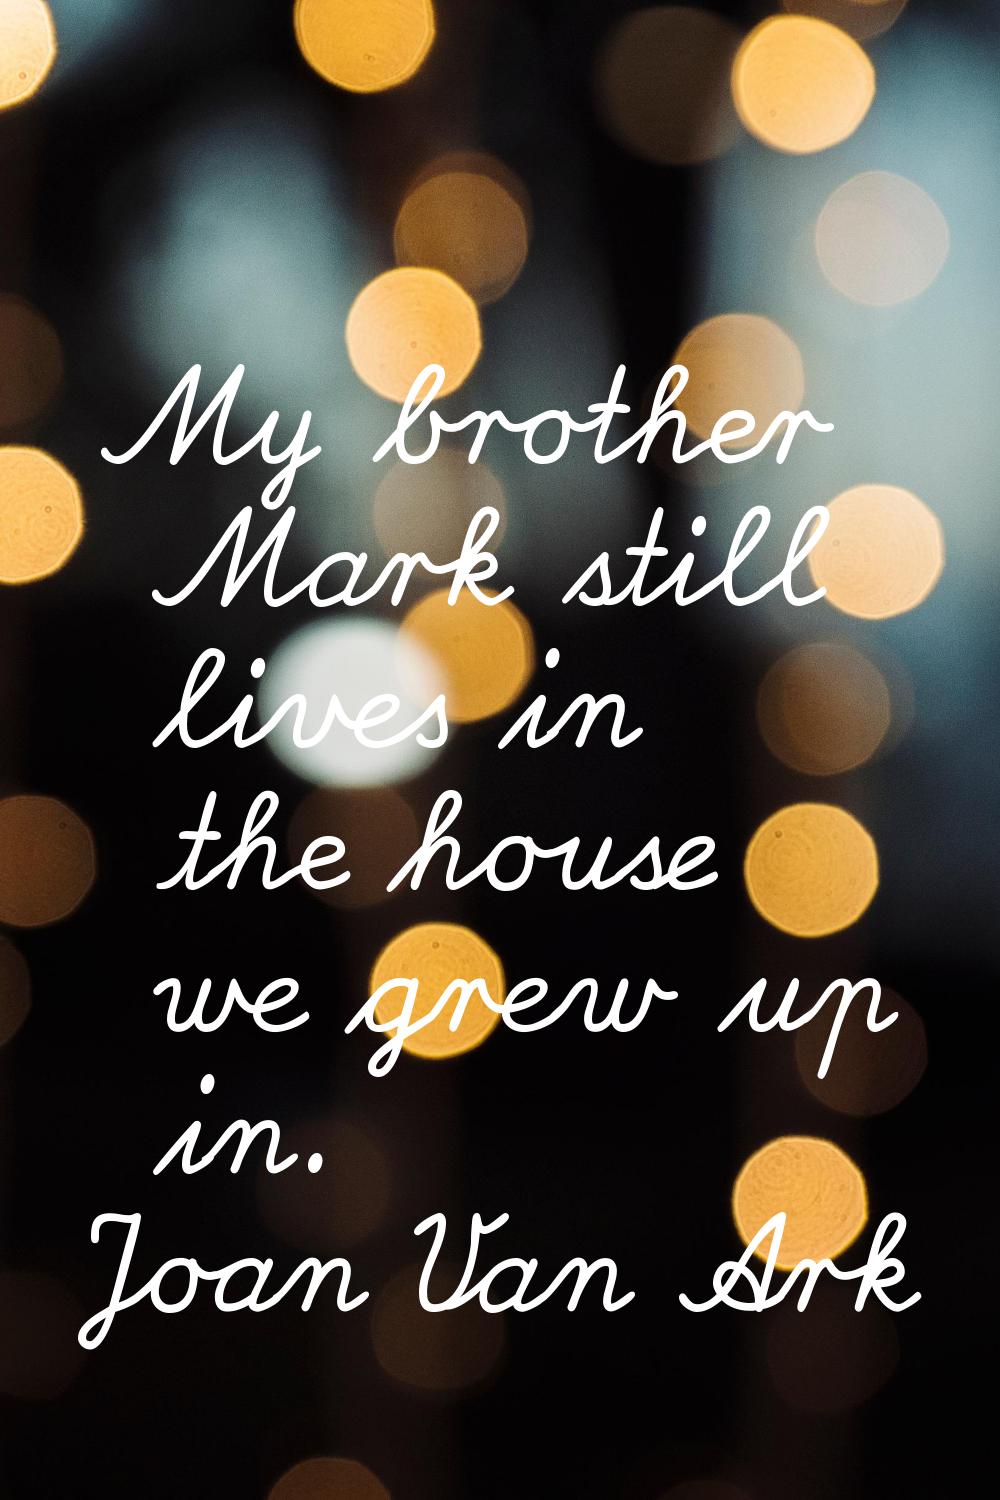 My brother Mark still lives in the house we grew up in.